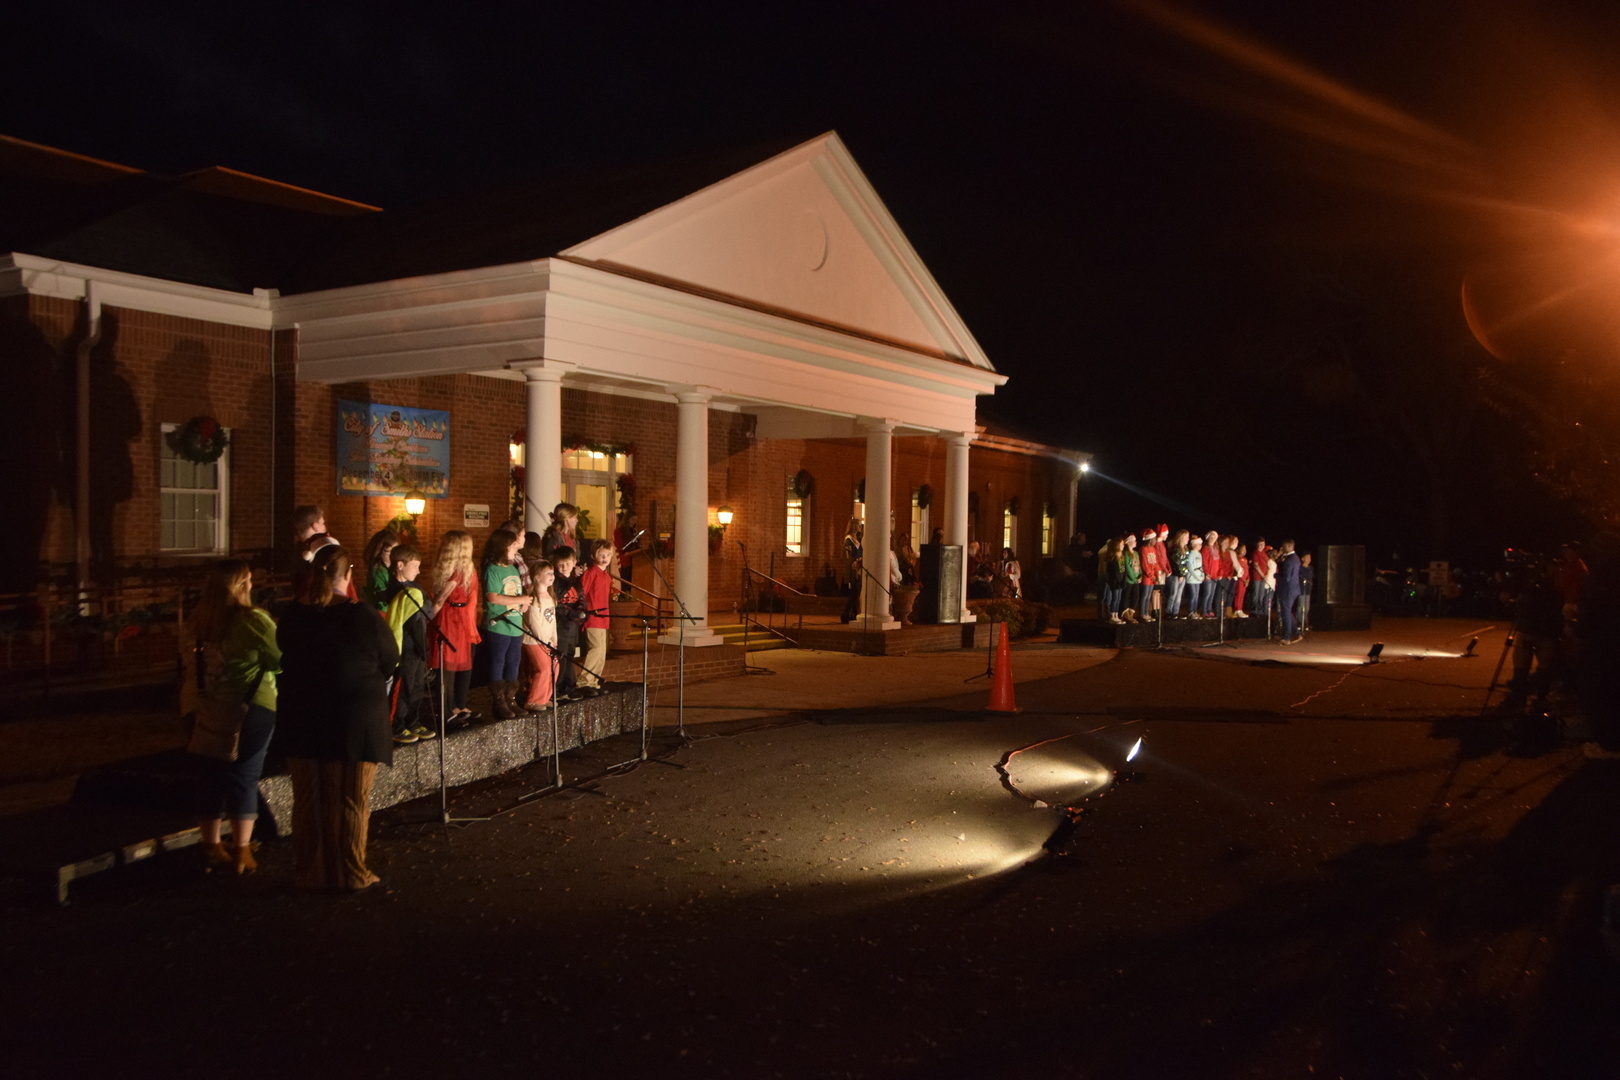 City of Smiths Station’s ‘9th Annual Christmas Tree Lighting’ will be held Dec. 12